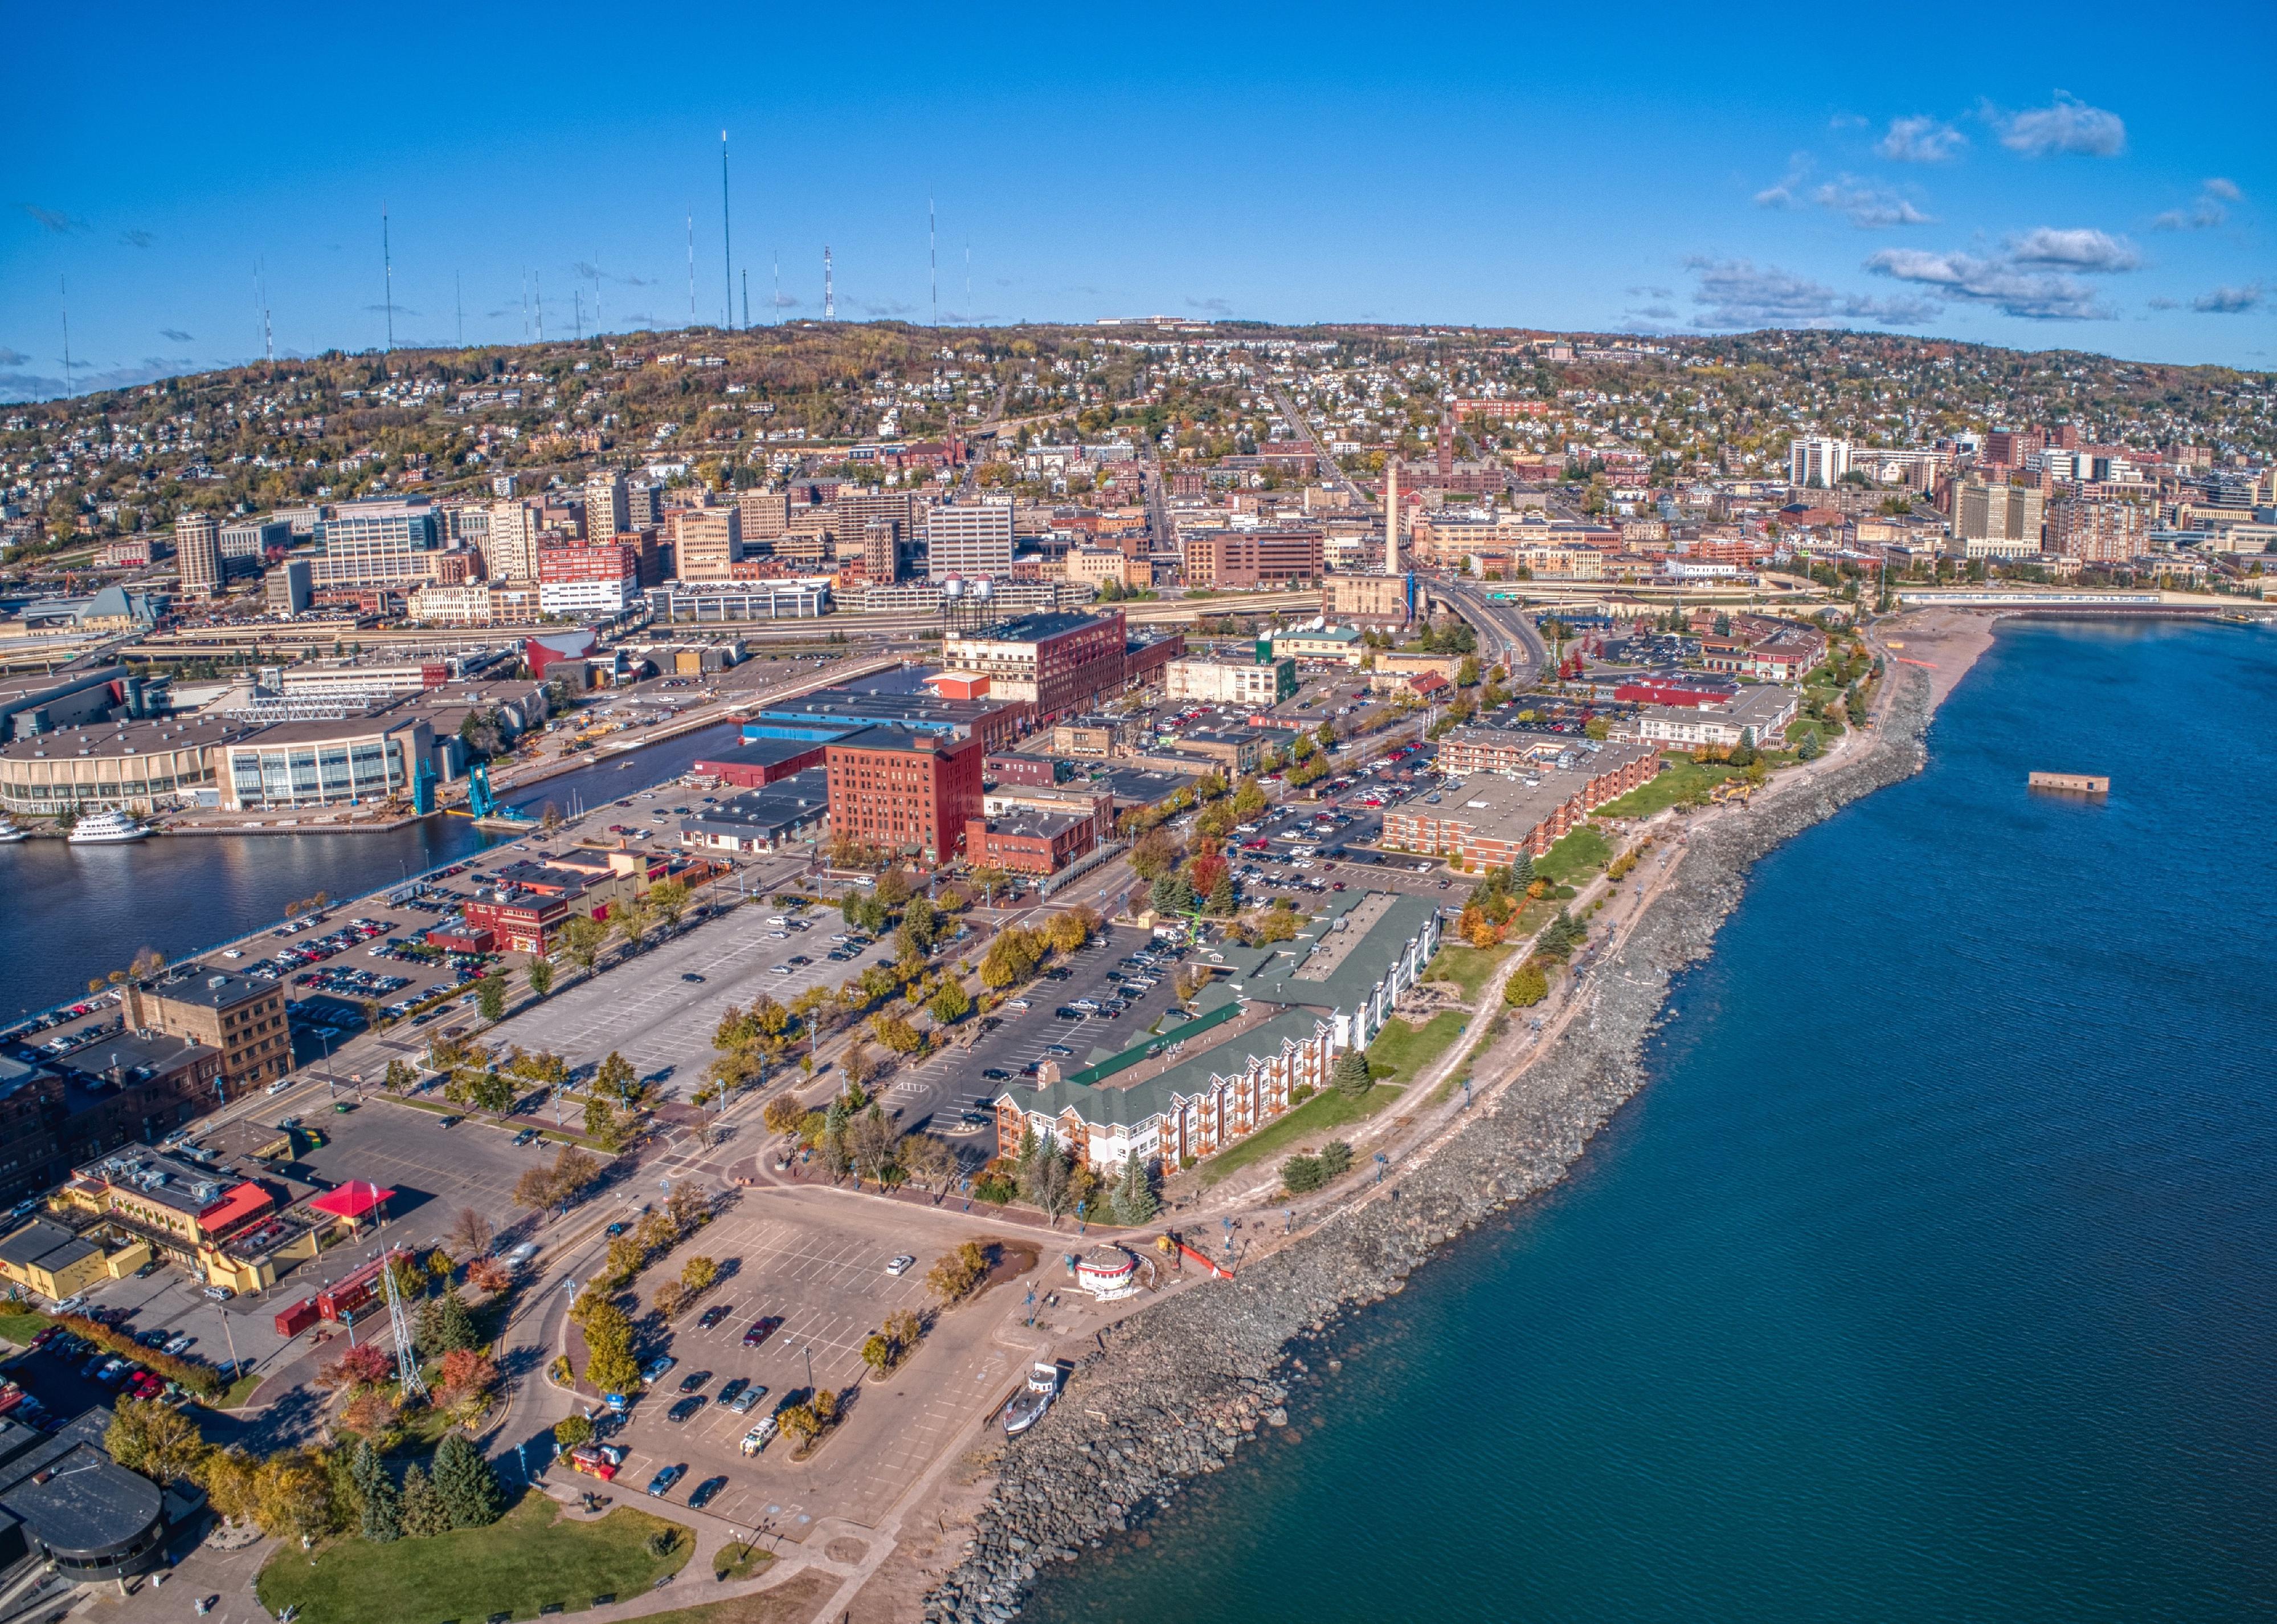 Aerial view of the popular Canal Park Area of Duluth.